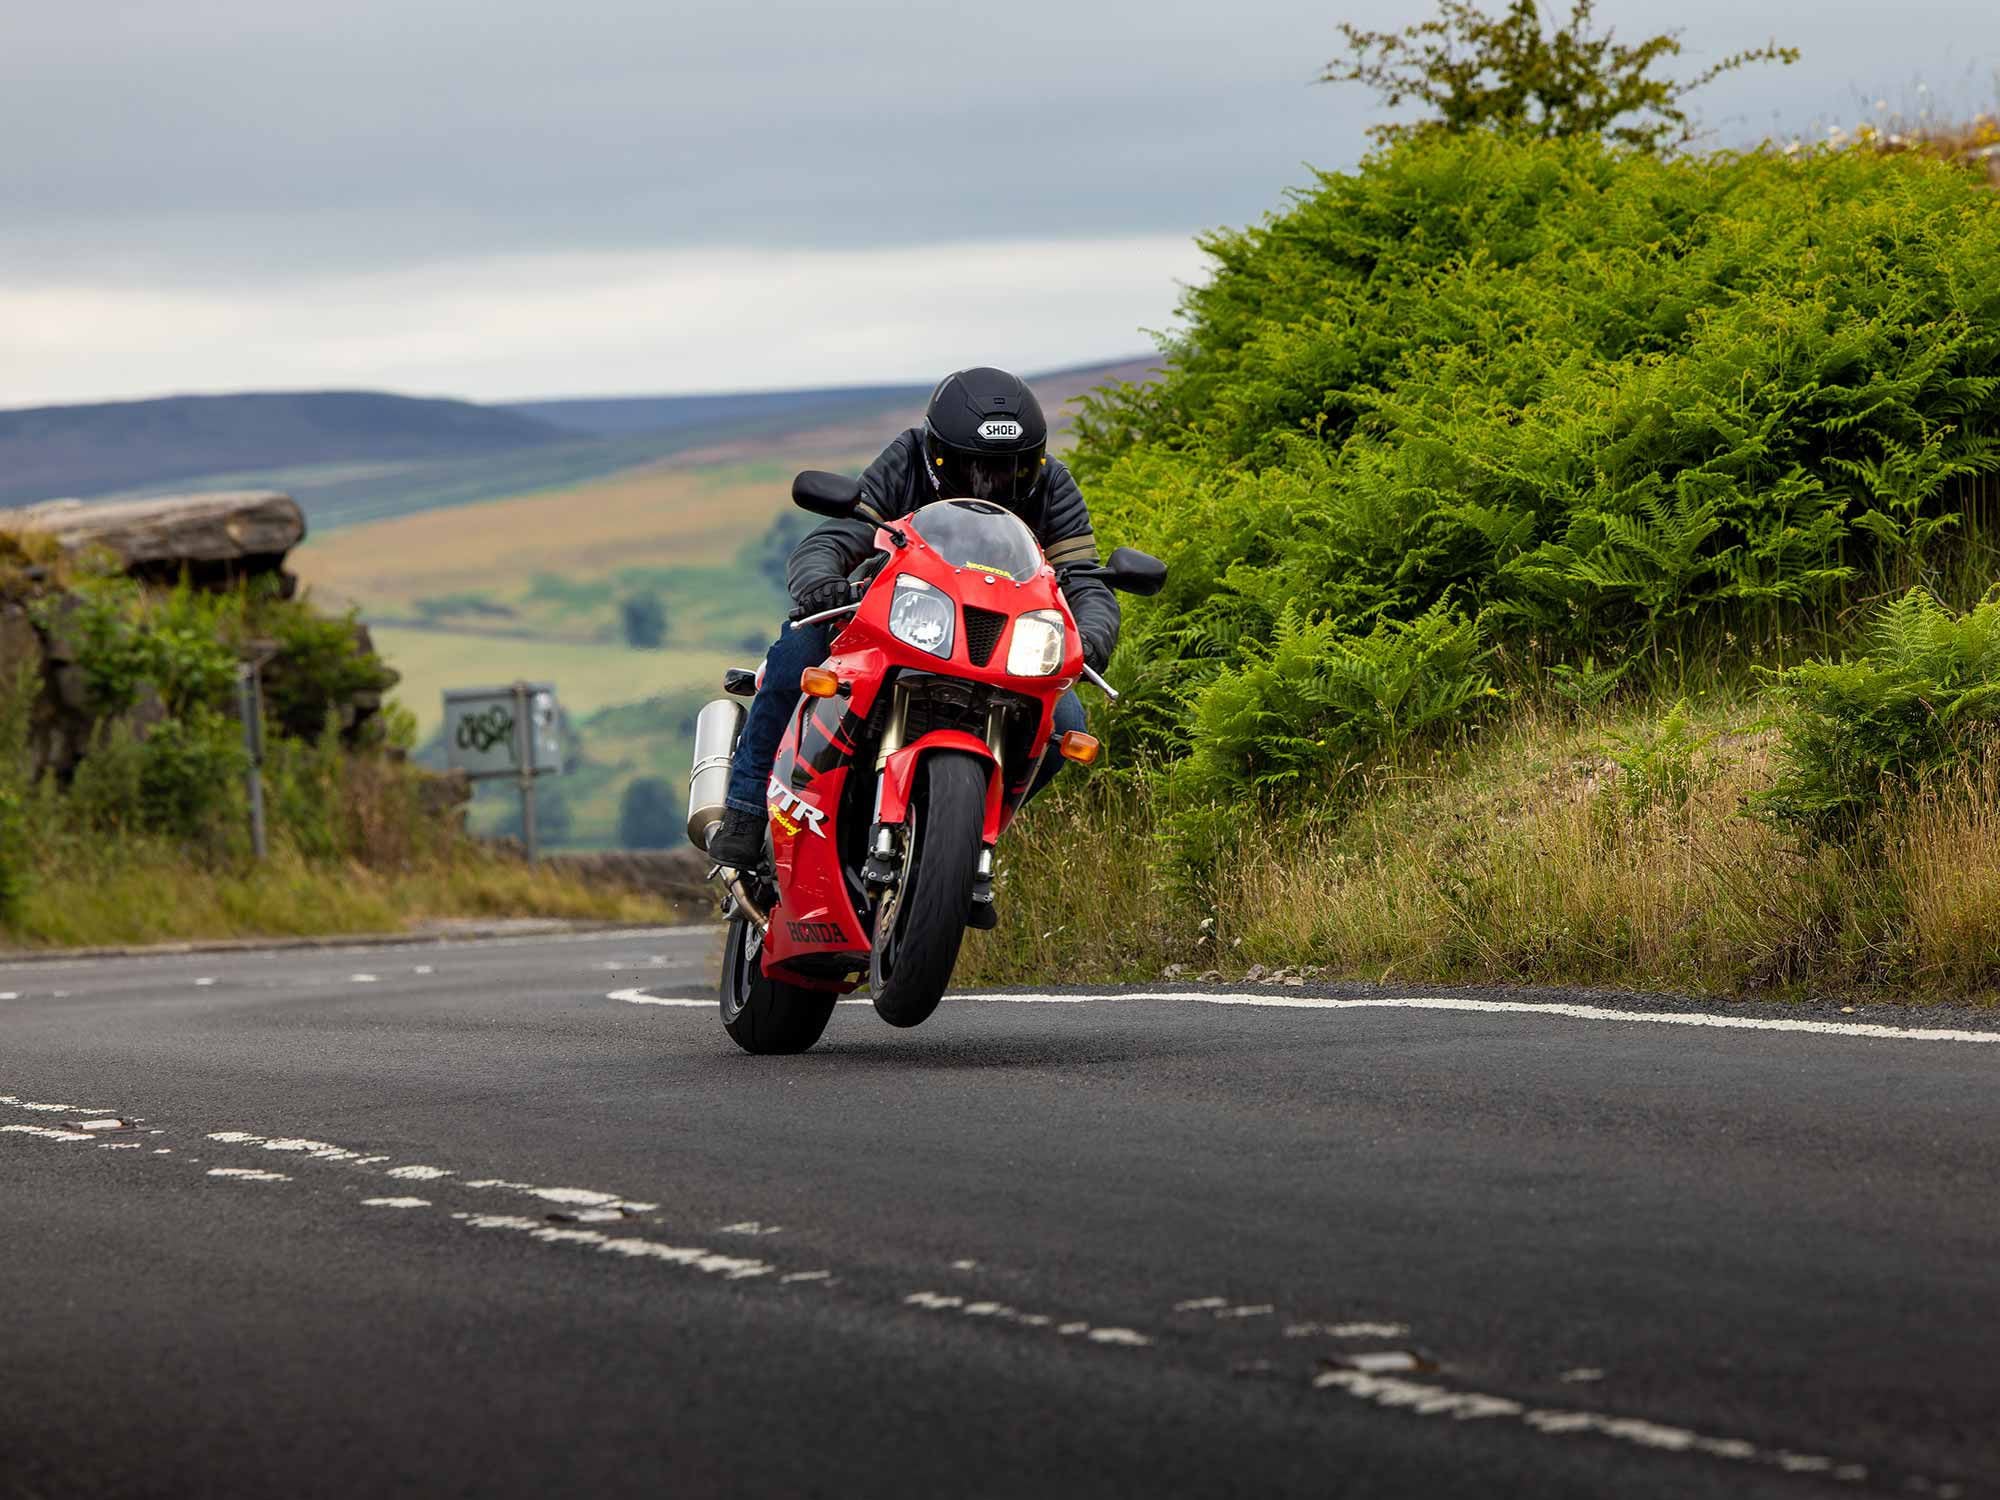 The RC 51 is still an exhilarating ride.